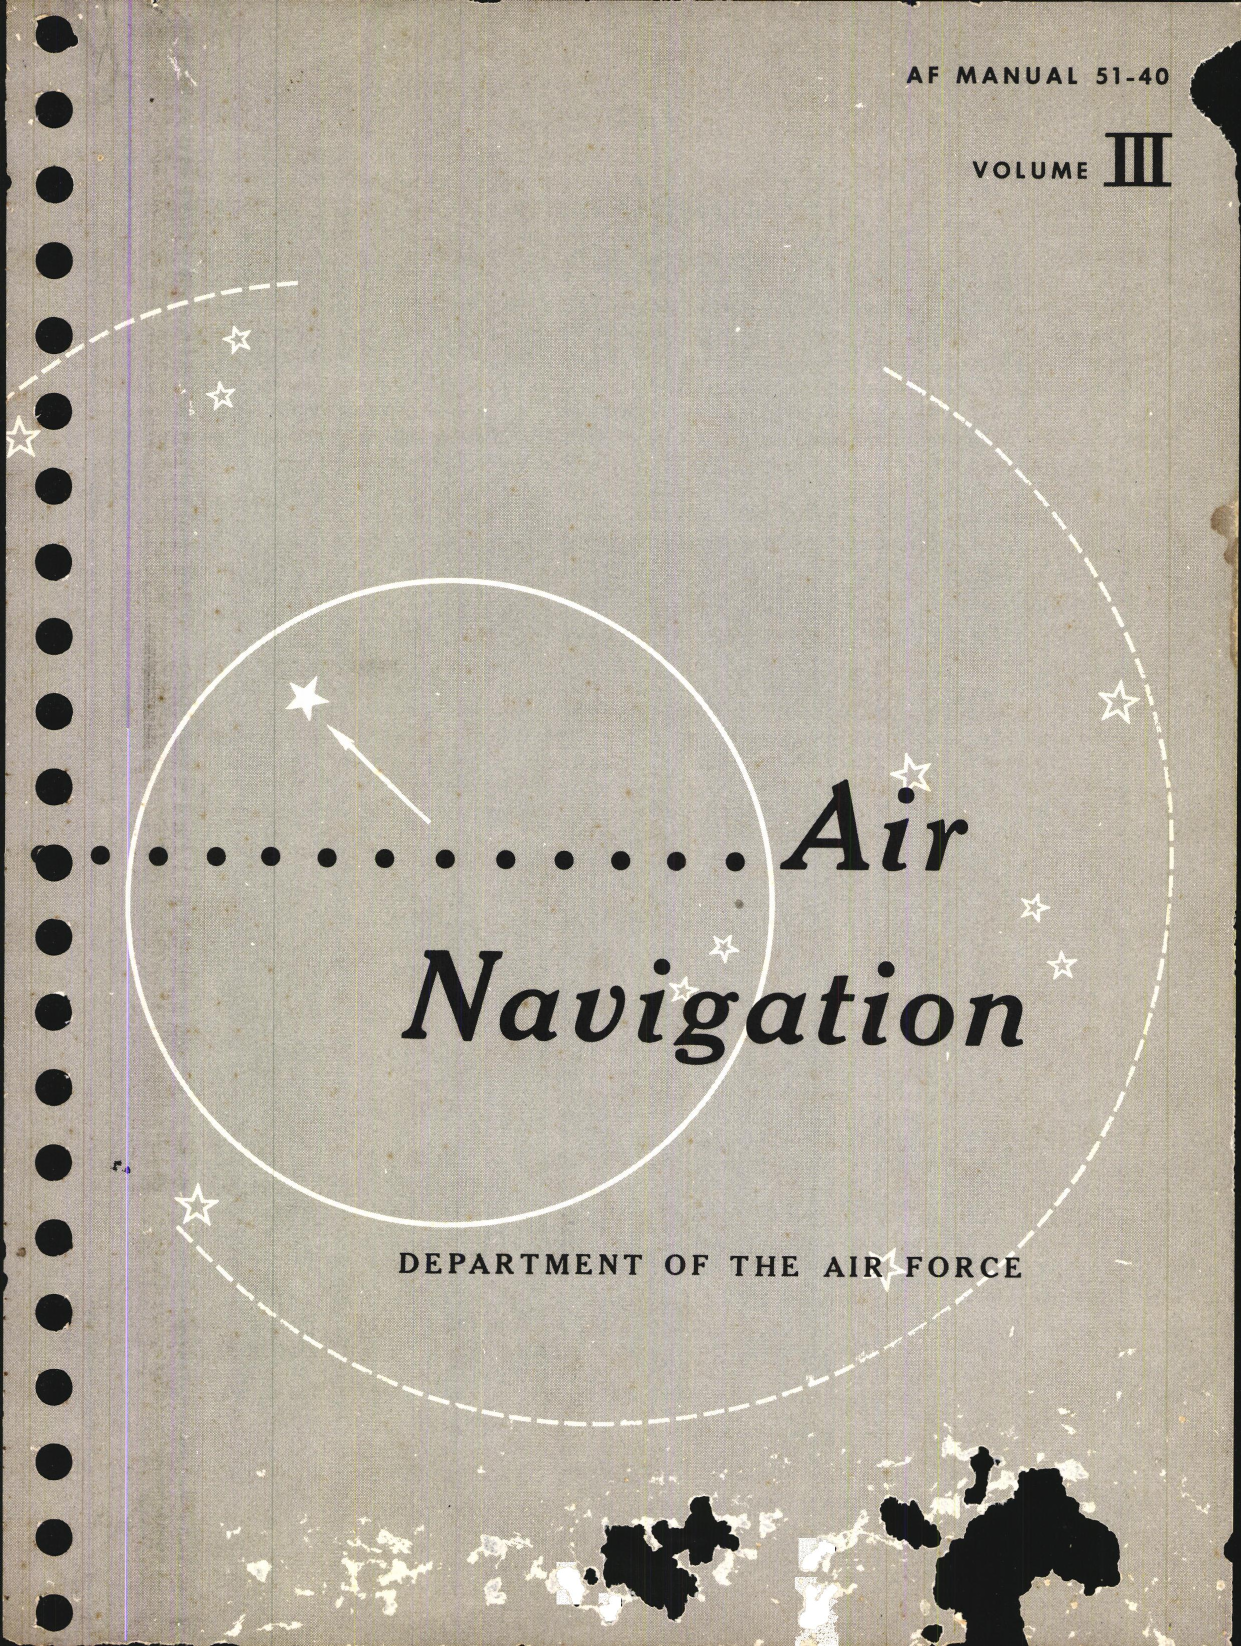 Sample page 1 from AirCorps Library document: Air Navigation Volume III